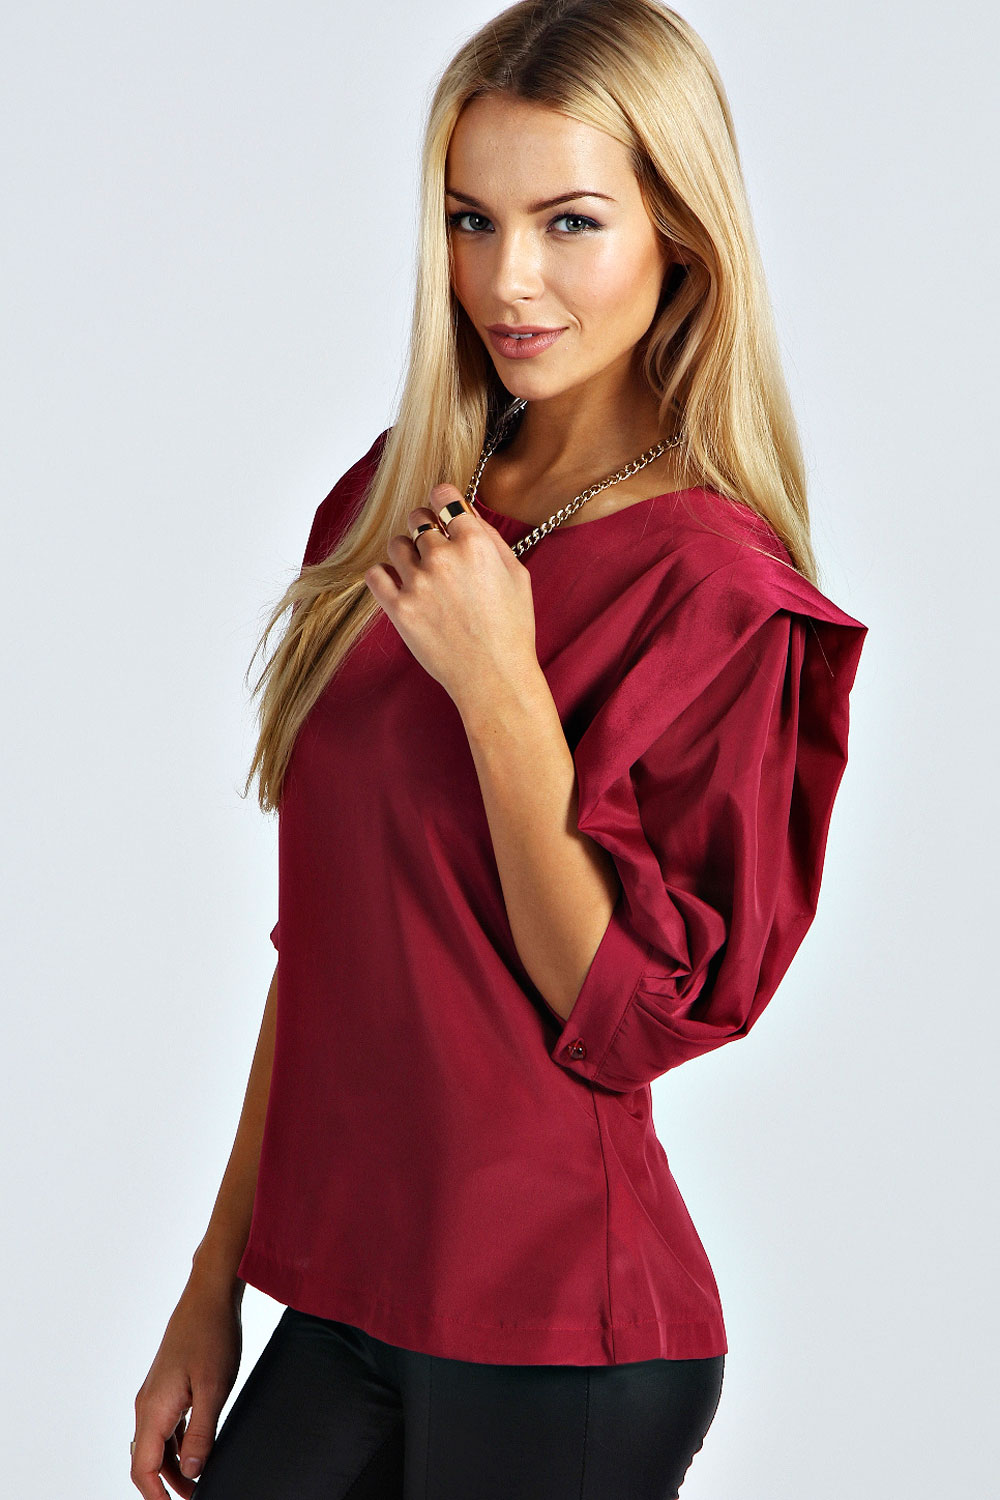 boohoo Amy Exaggerated Sleeve Blouse - berry, berry